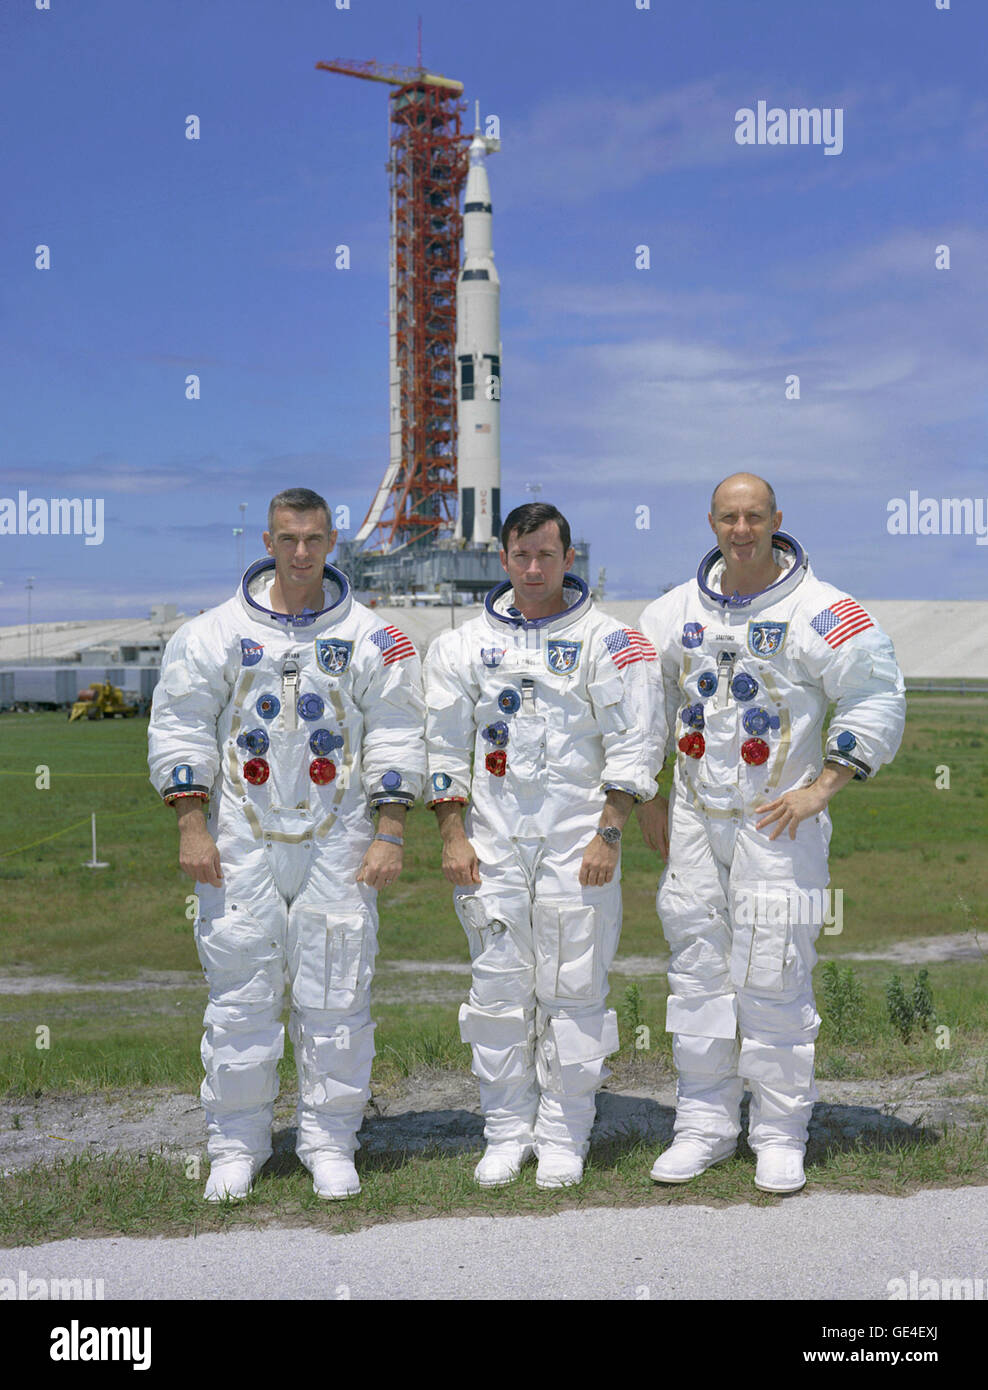 (May 1969) The prime crew of the Apollo 10 lunar orbit mission is photographed while at the Kennedy Space Center for pre-flight training. Left to right are astronauts Eugene A. Cernan, Lunar Module pilot; John W. Young, Command Module pilot; and Thomas P. Stafford, Commander.  Image # : S69-34385 Stock Photo